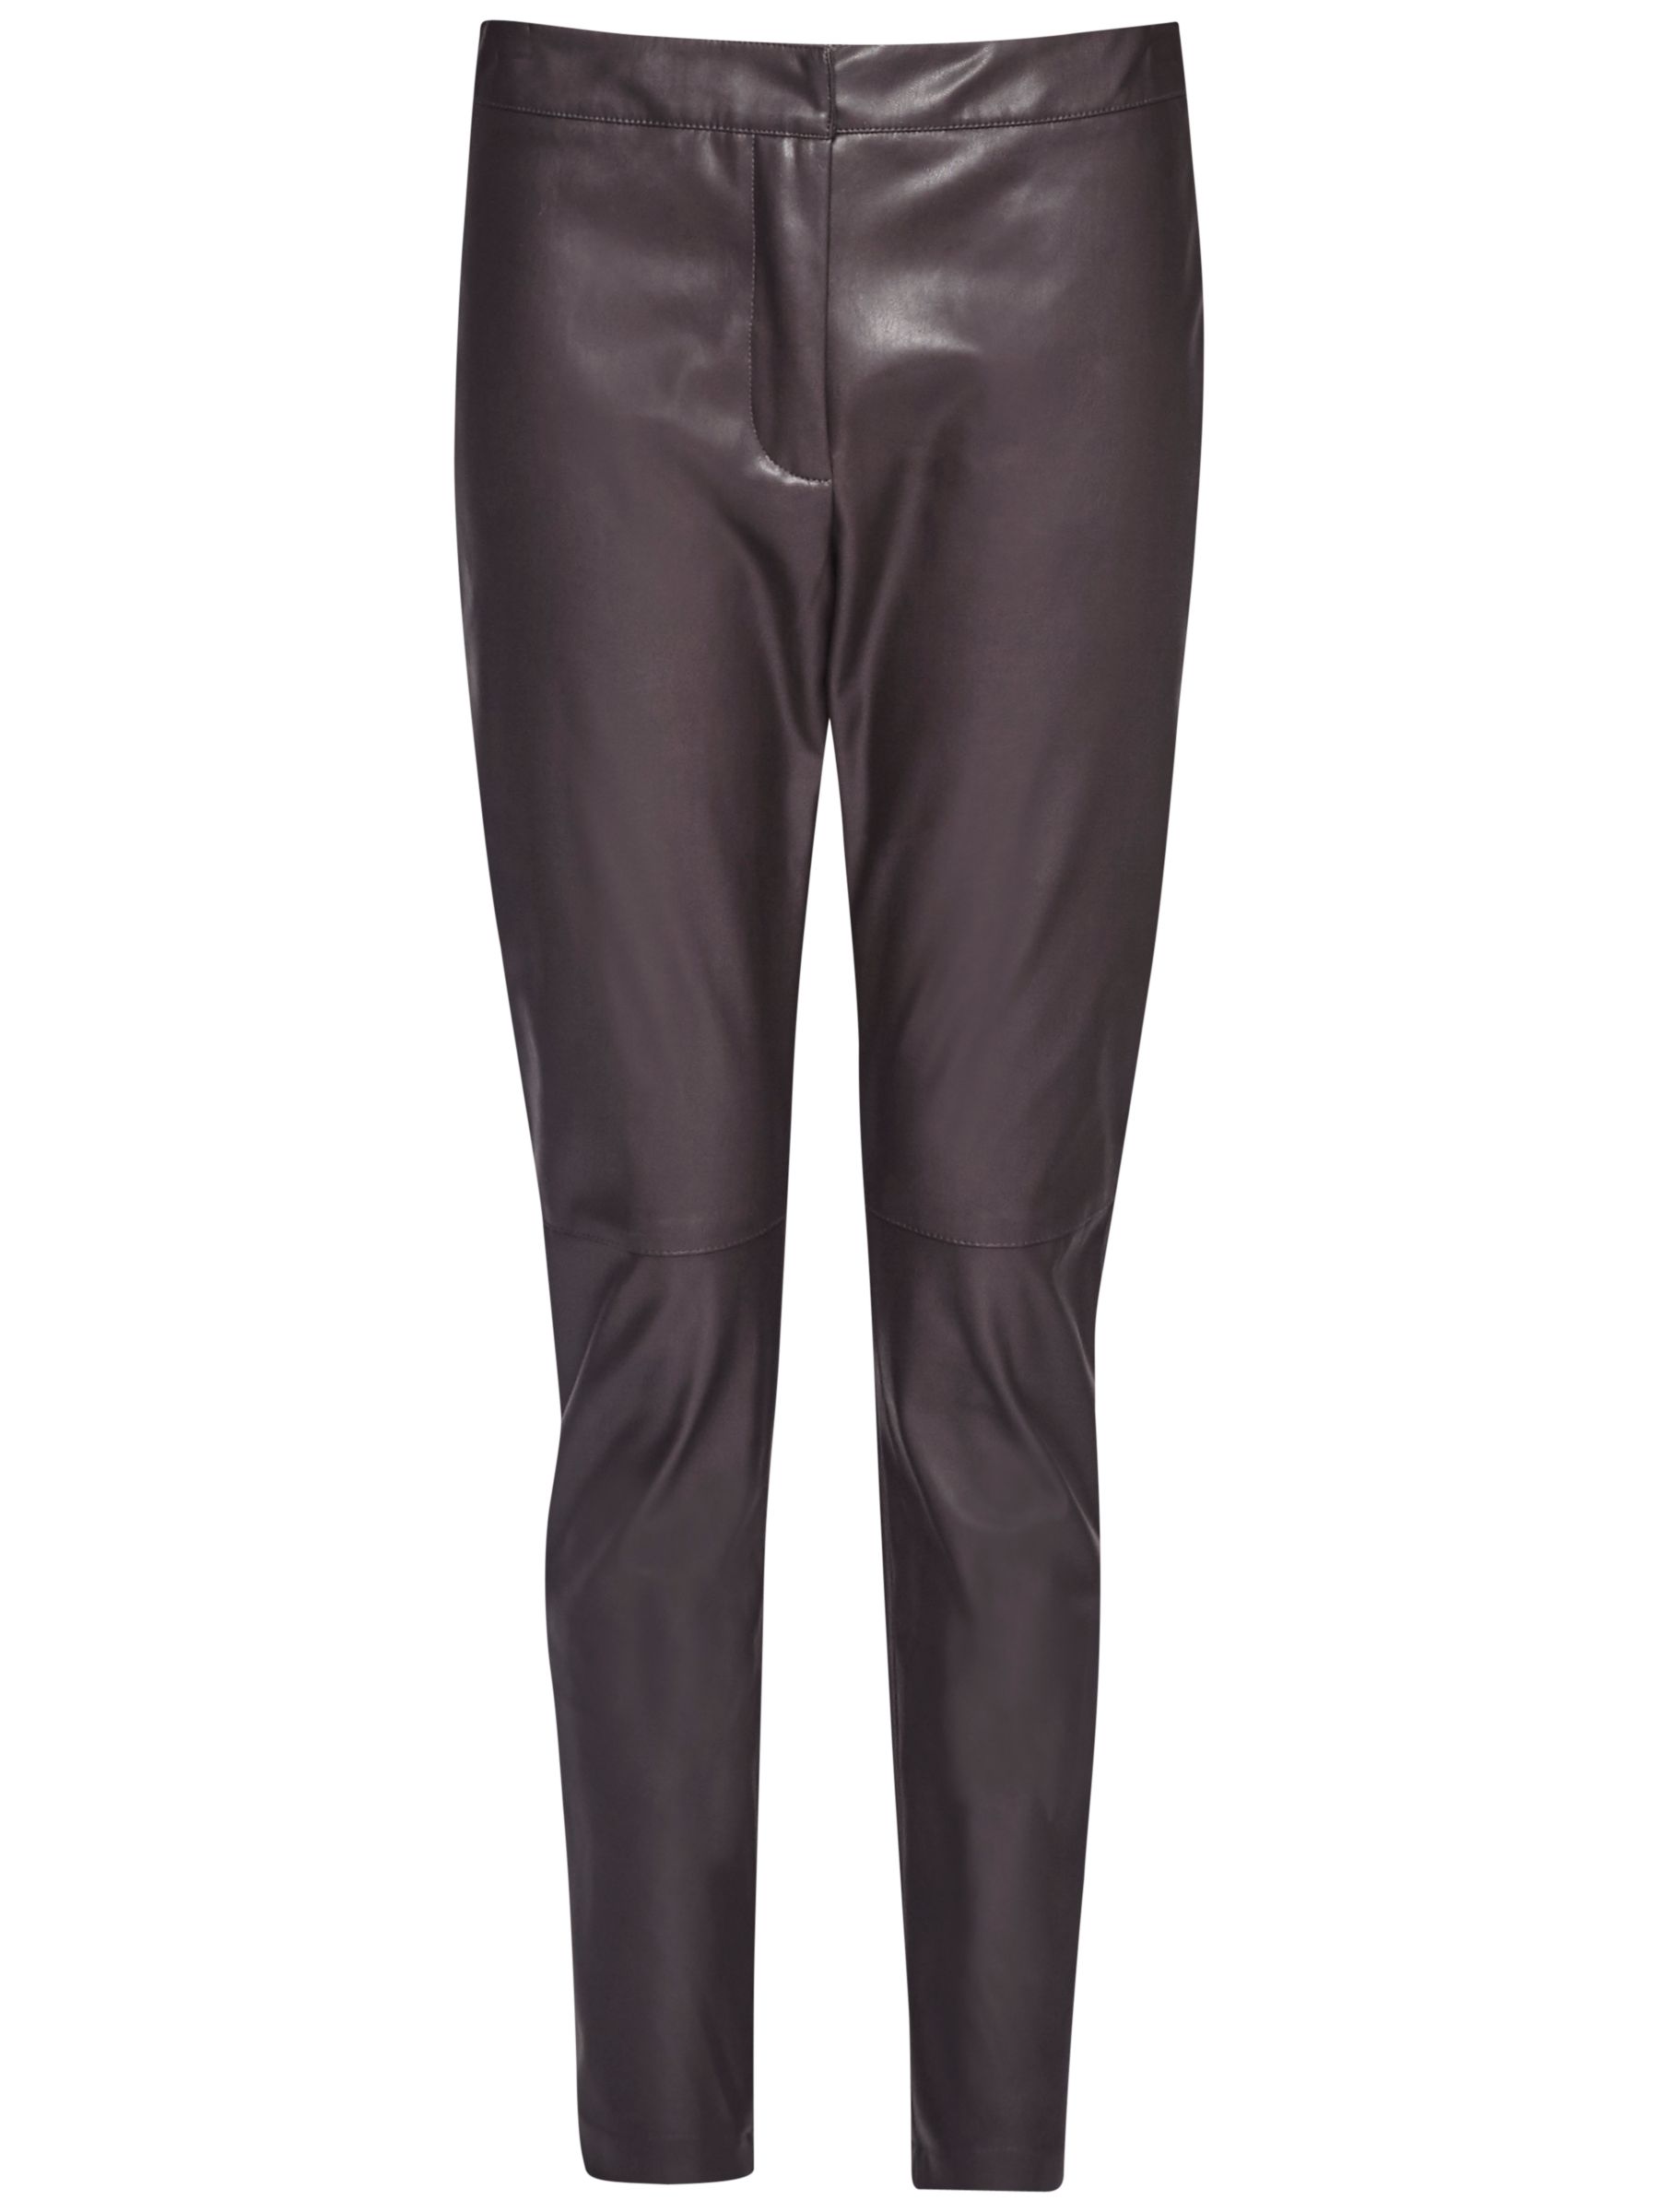 where to buy leather trousers